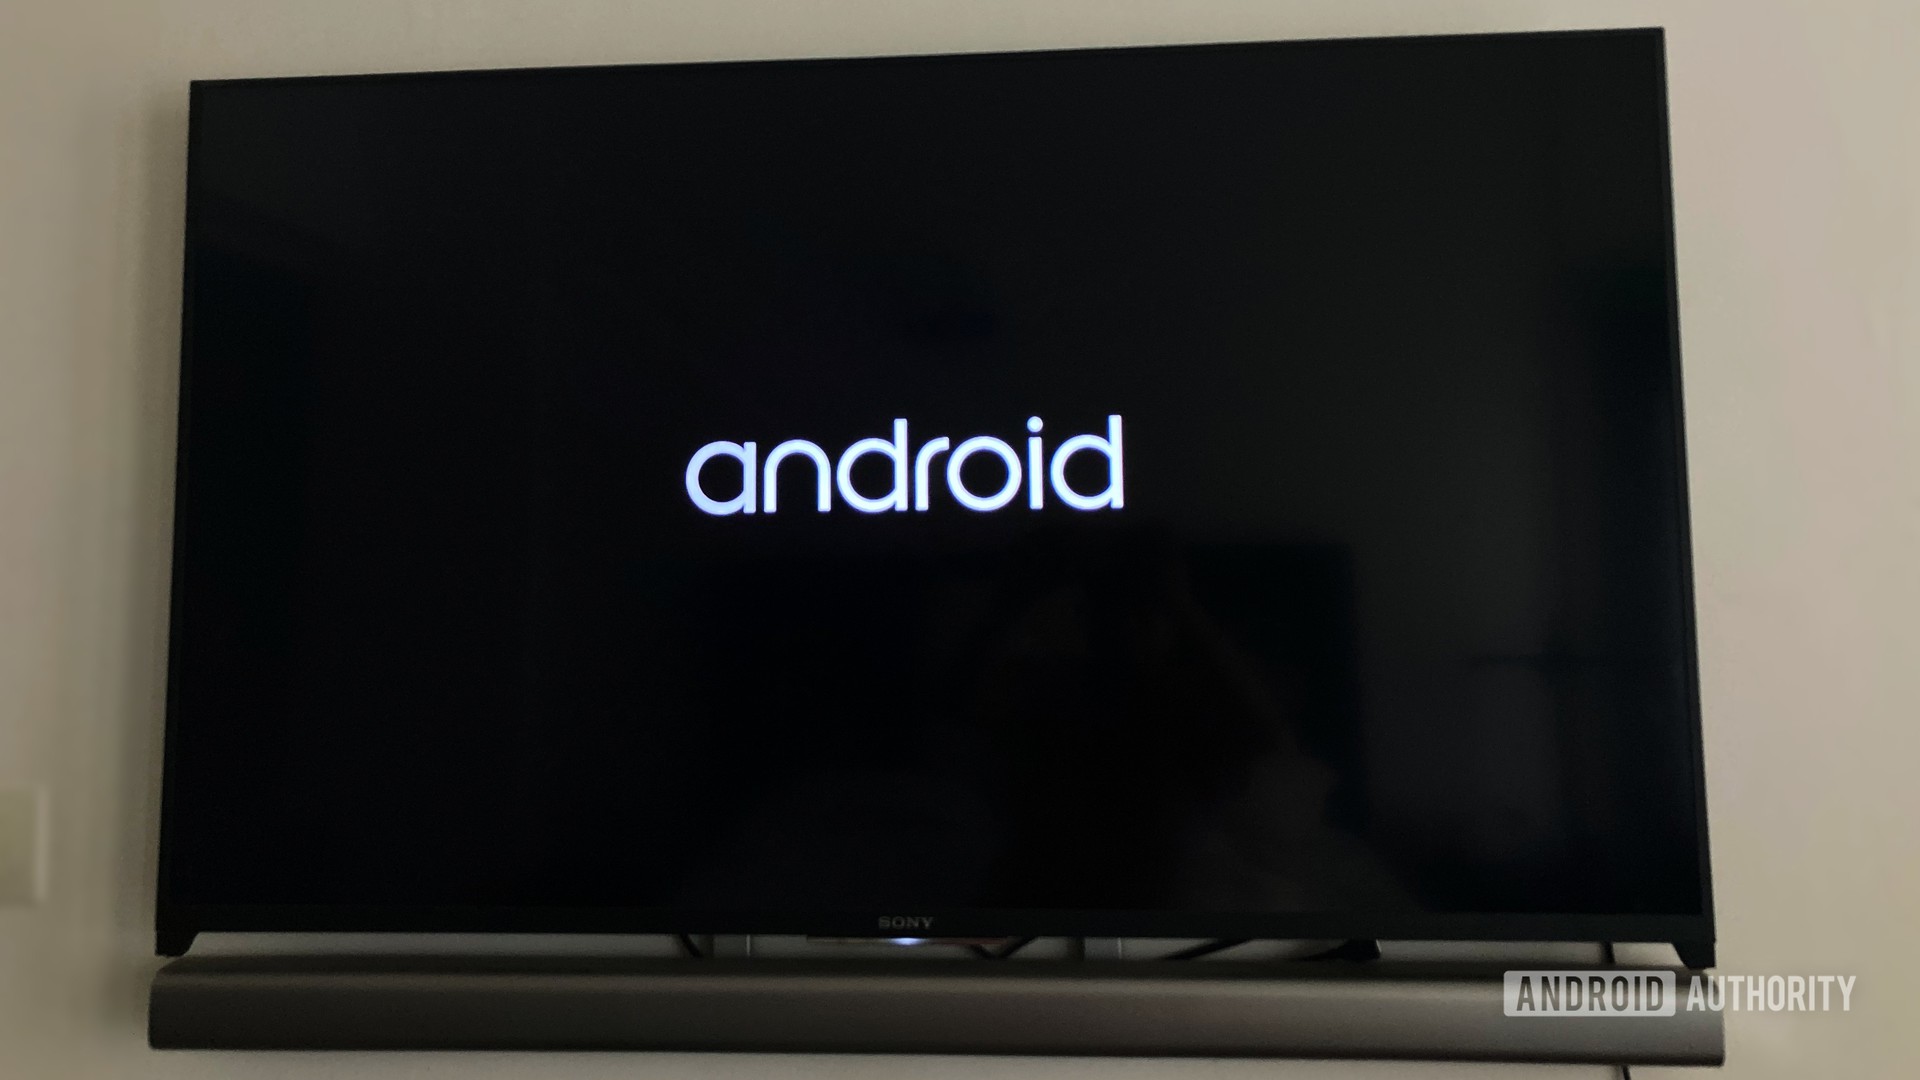 Google TV/Android TV might double as a Bluetooth speaker someday